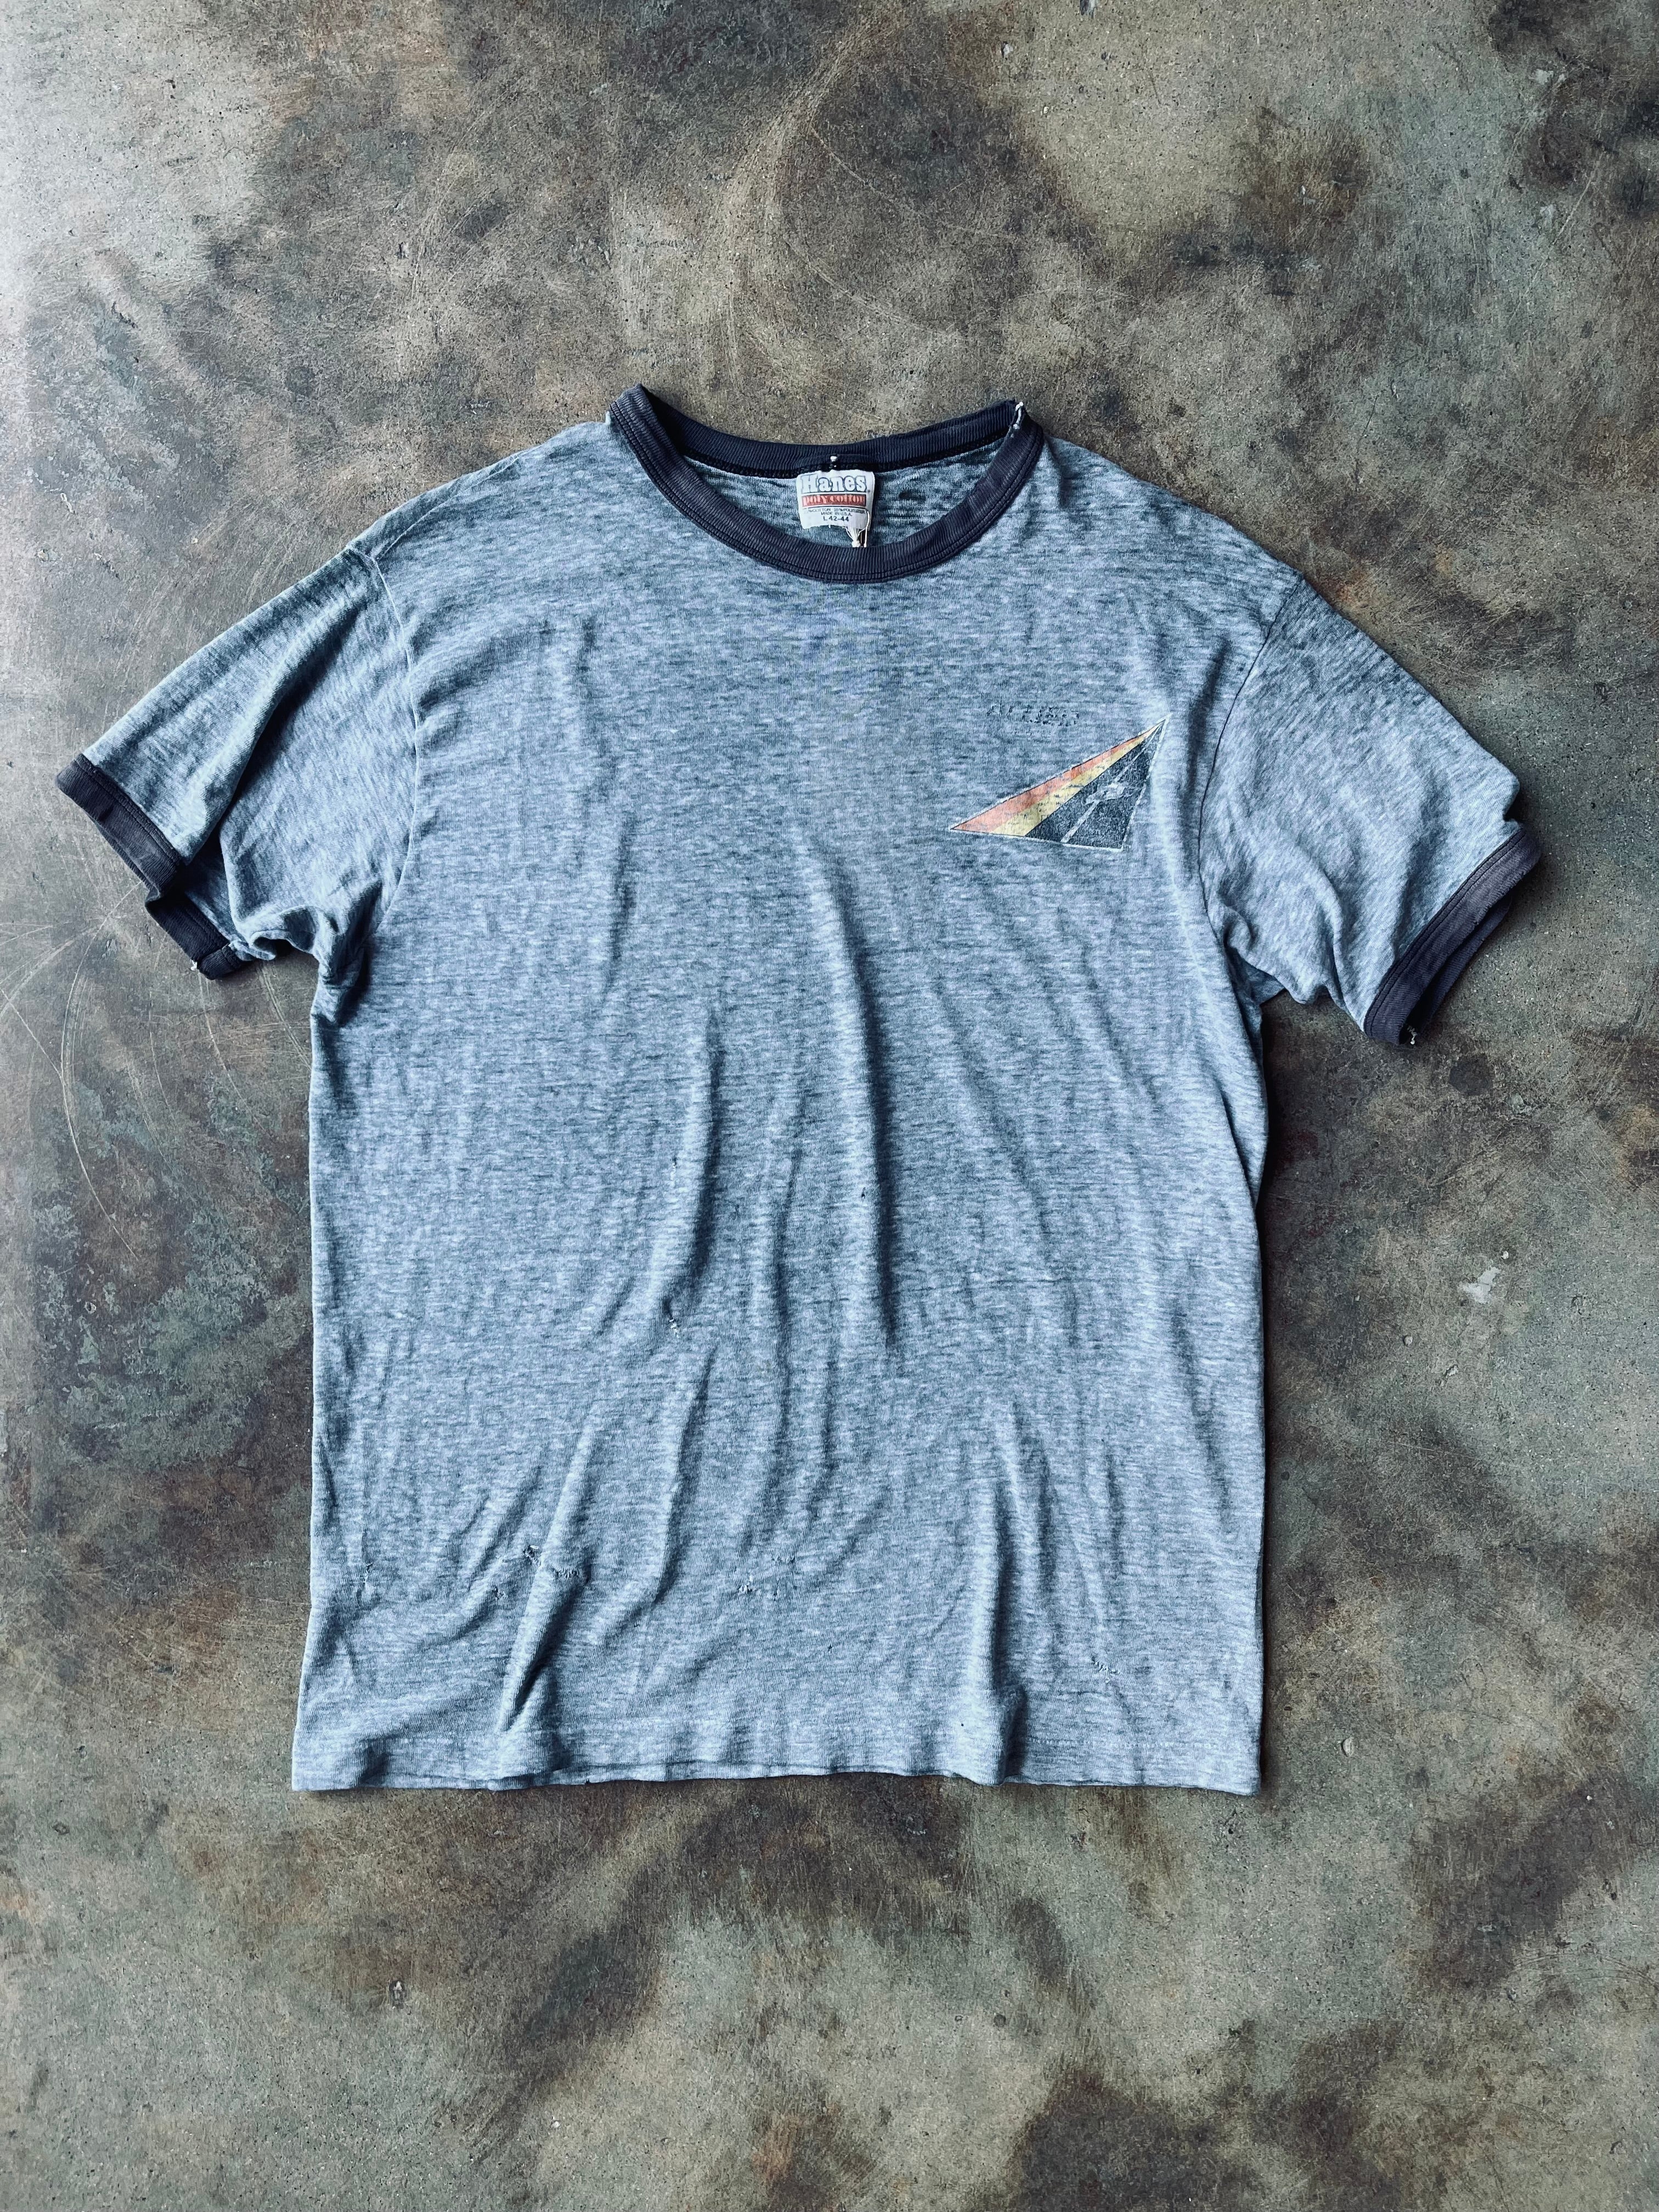 1980’s Hanes “Allied” Ringer Tee | Large